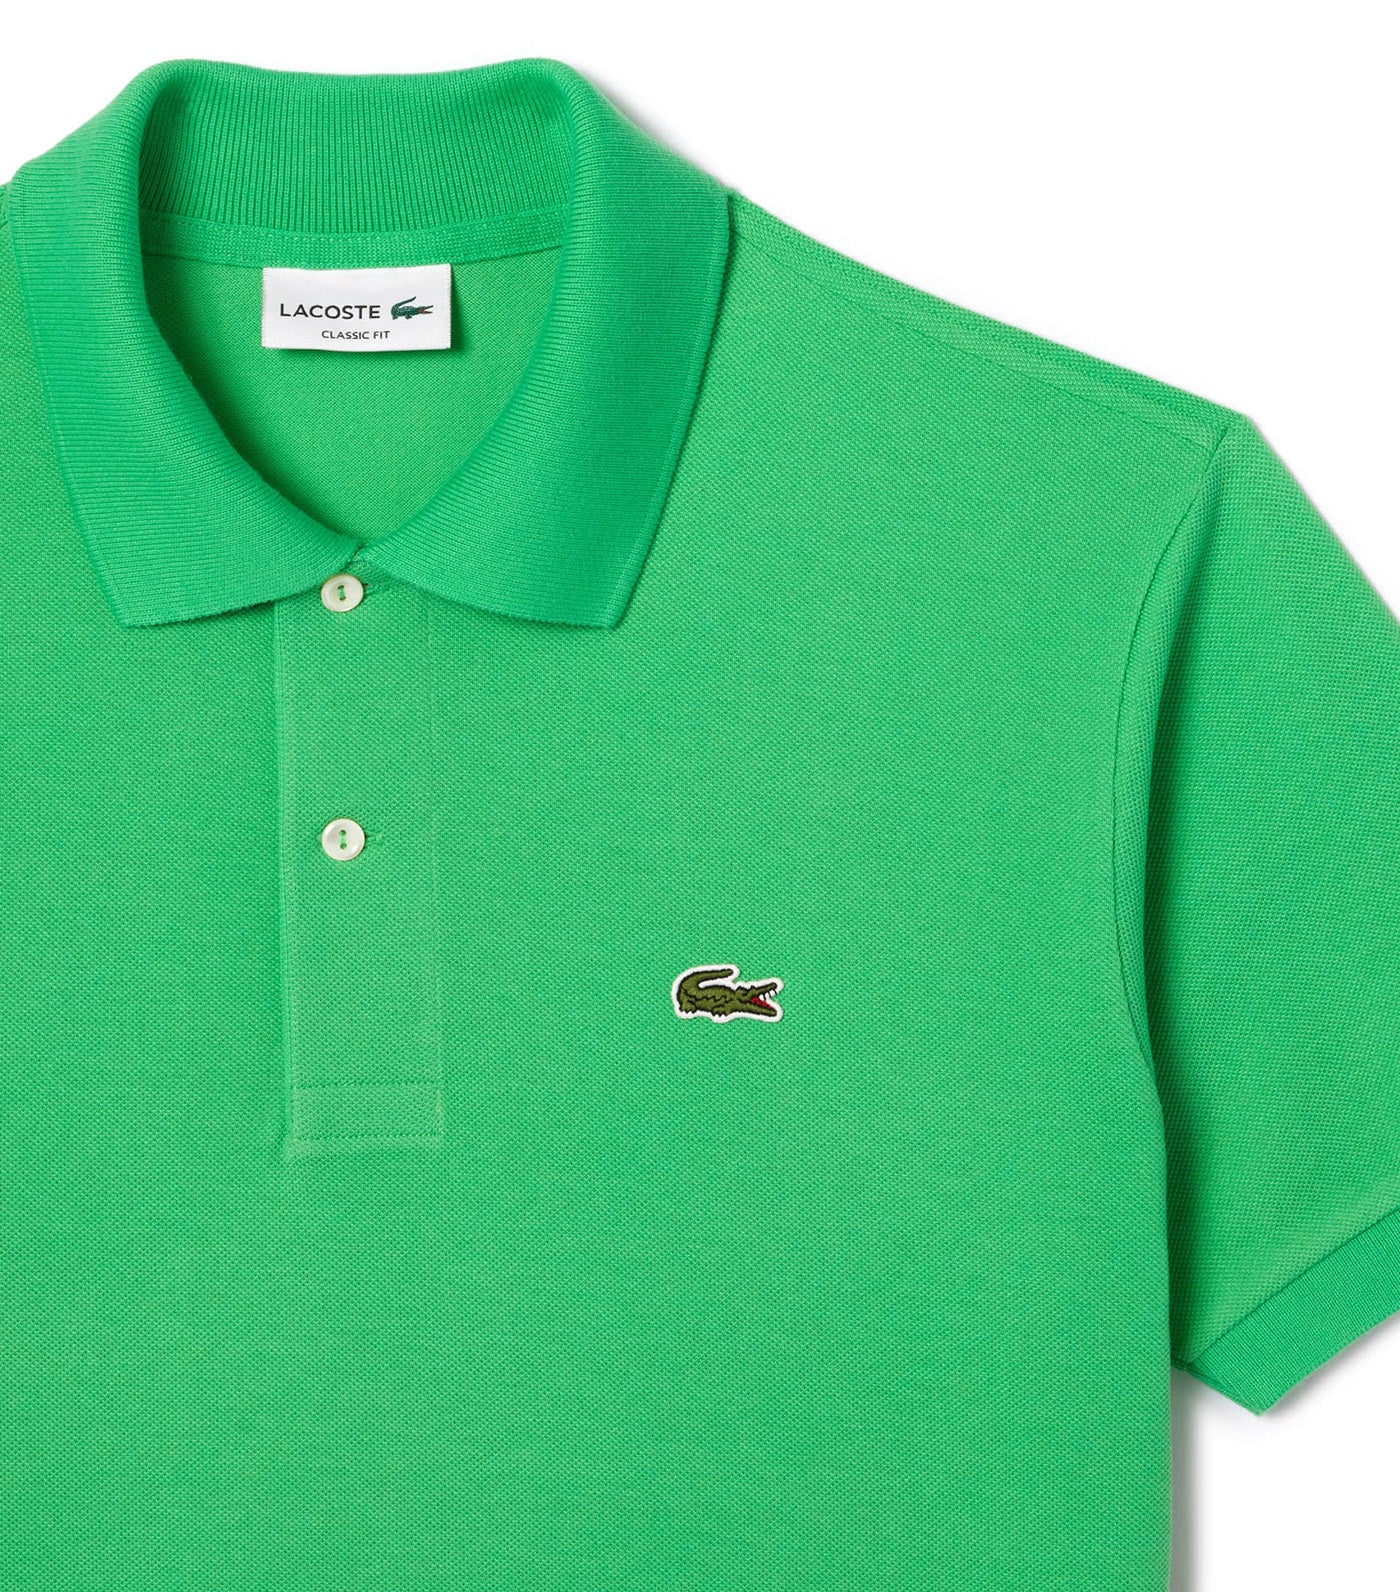 Lacoste Classic Fit L.12.12 Polo Shirt Peppermint